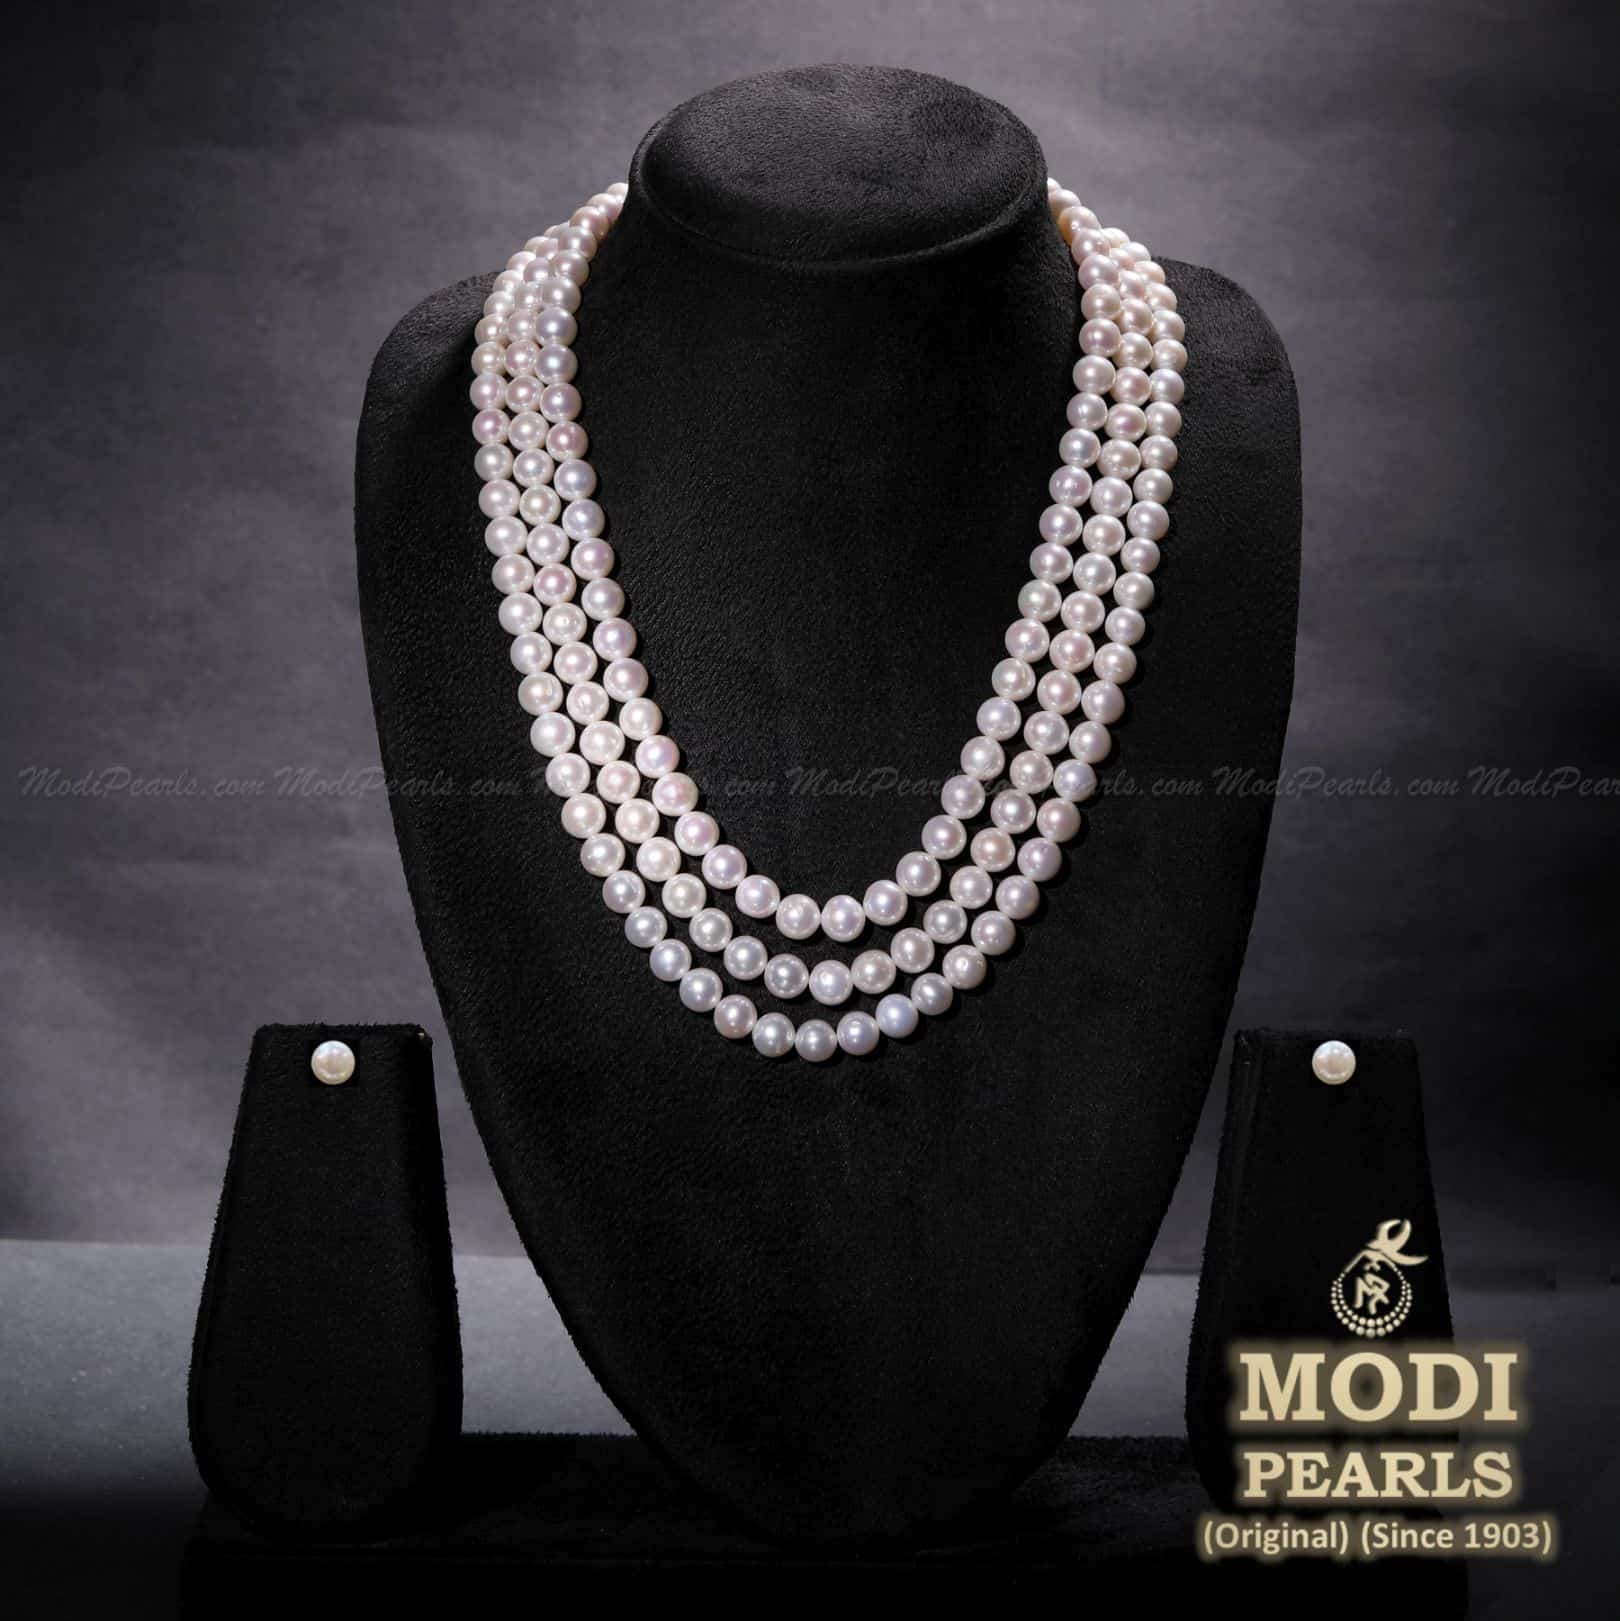 Royal Pearl Necklace Saltwater South Sea White Gold 18k French Fine Jewelry  | eBay